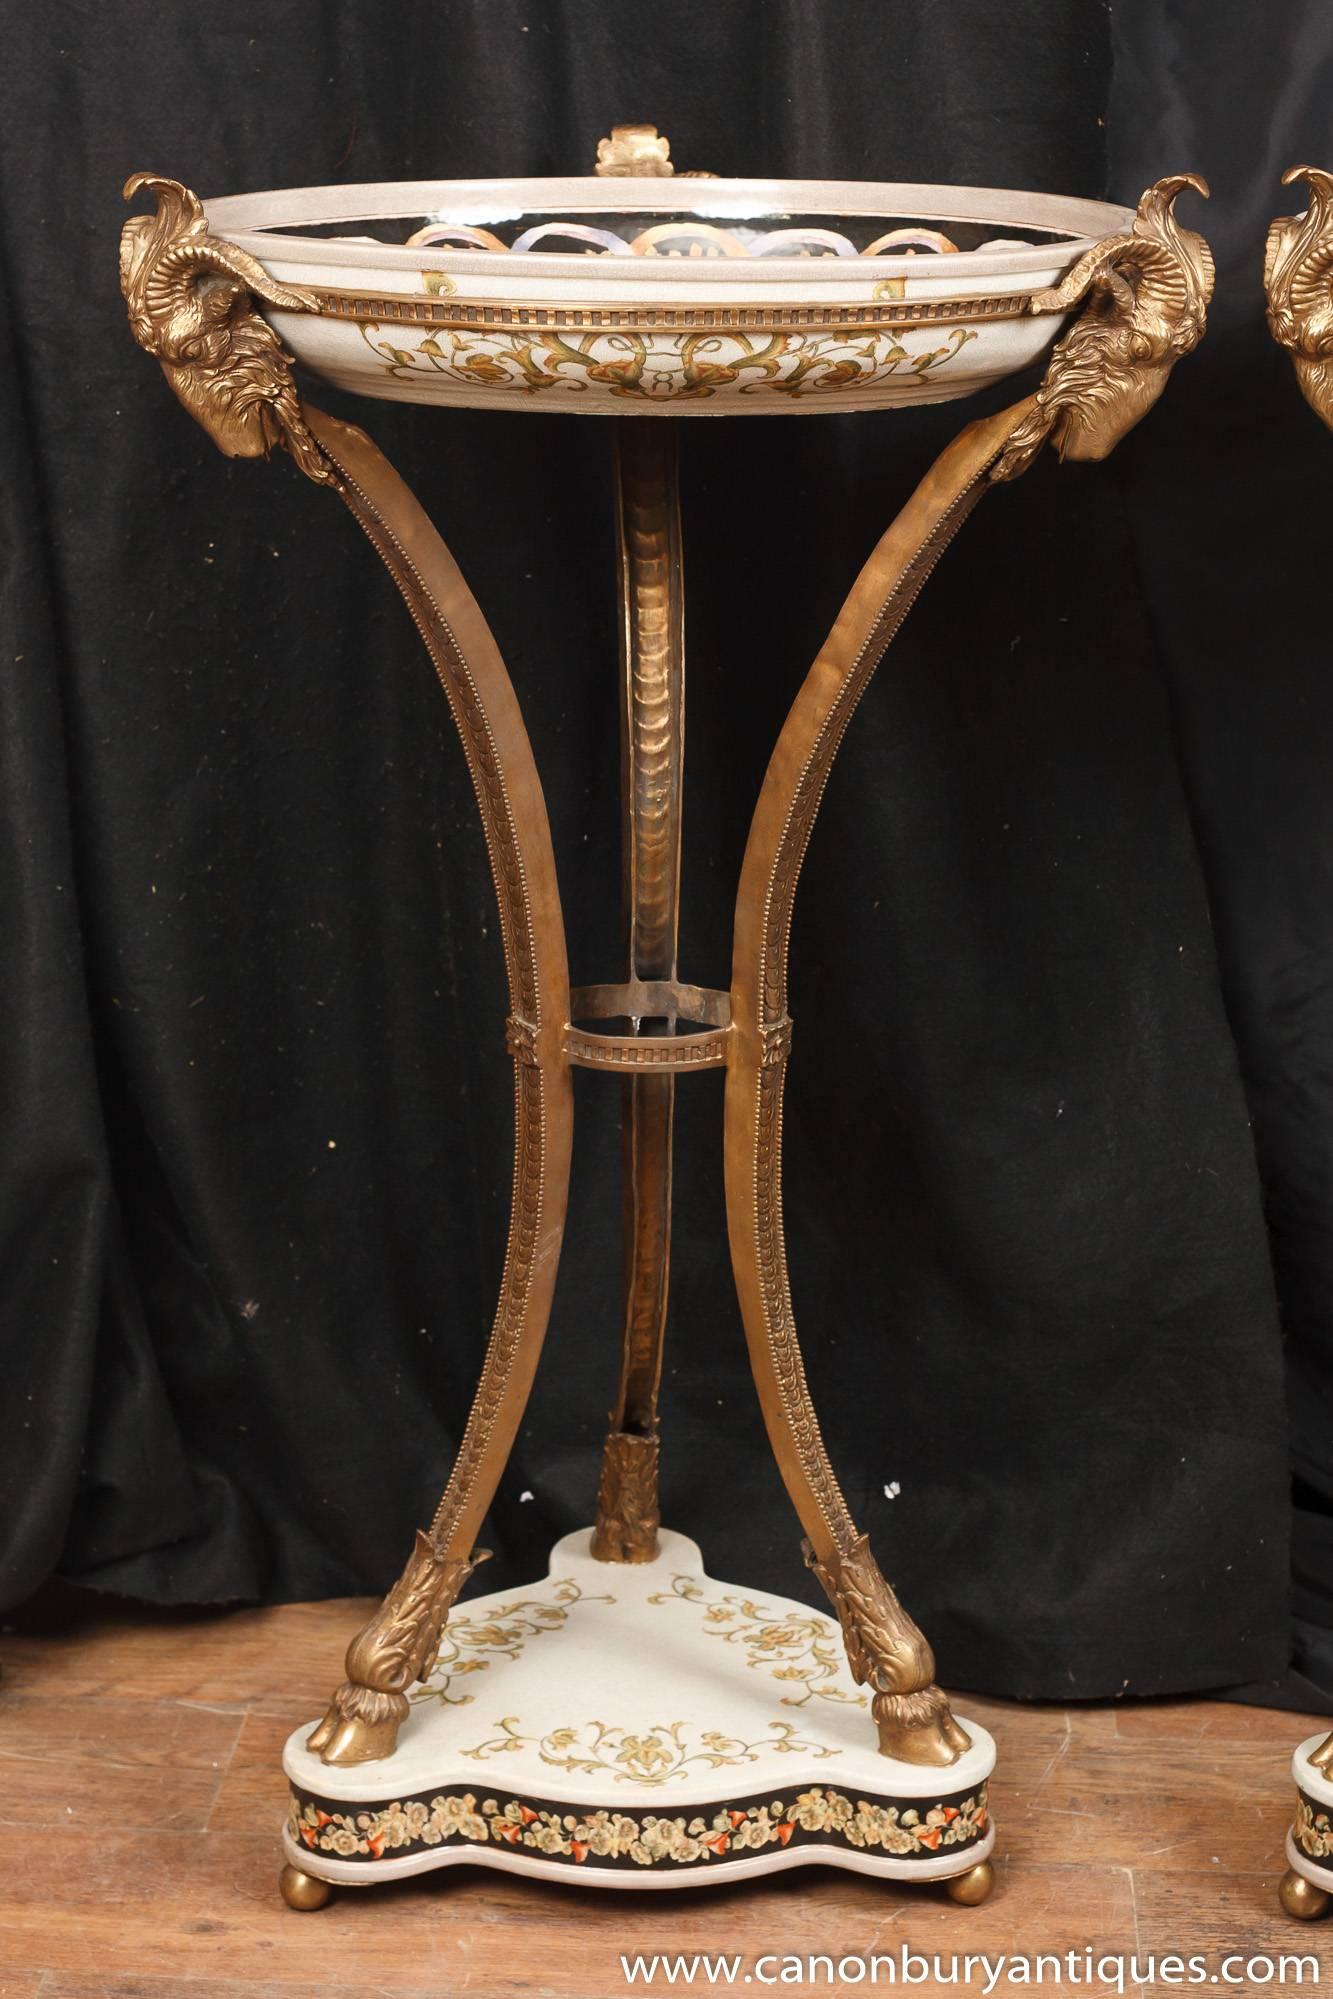 Contemporary French Empire Style Ormolu Porcelain Torcheres Plant Stands Jardineres For Sale